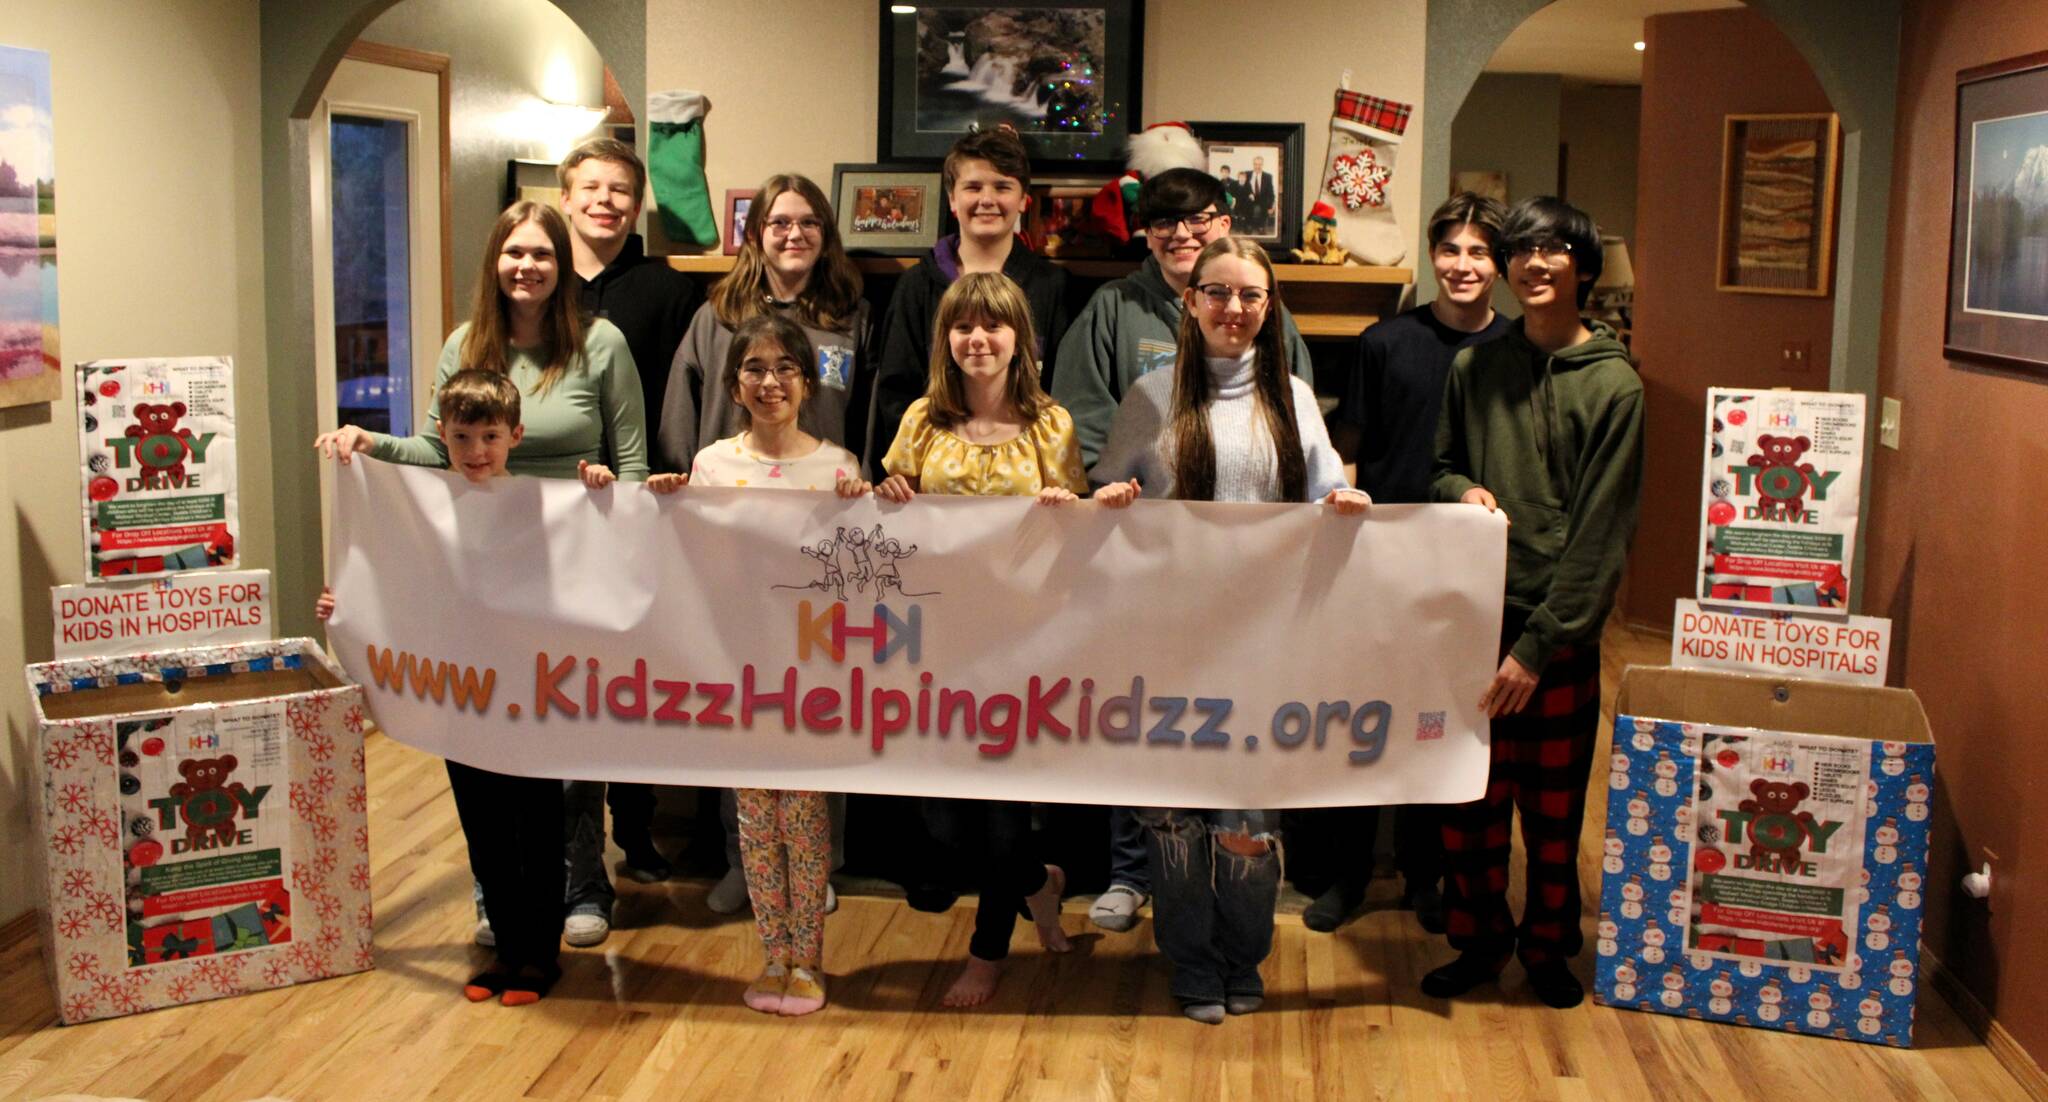 Elisha Meyer/Kitsap News Group
The kids are ready to take donations for this year’s Kidzz Helping Kidzz toy drive.